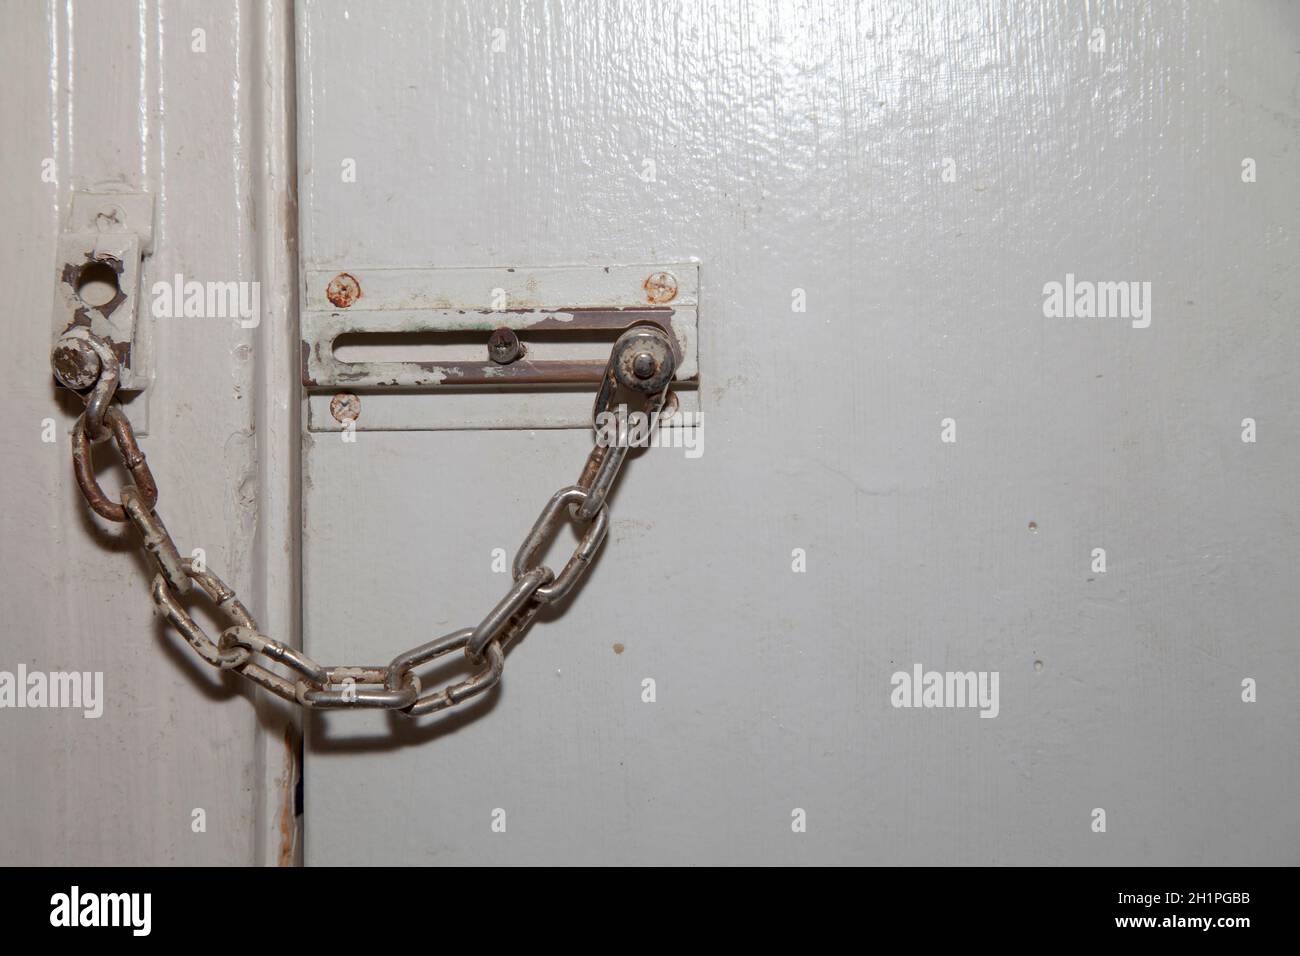 Old door chain not in the locked position on a white door Stock Photo